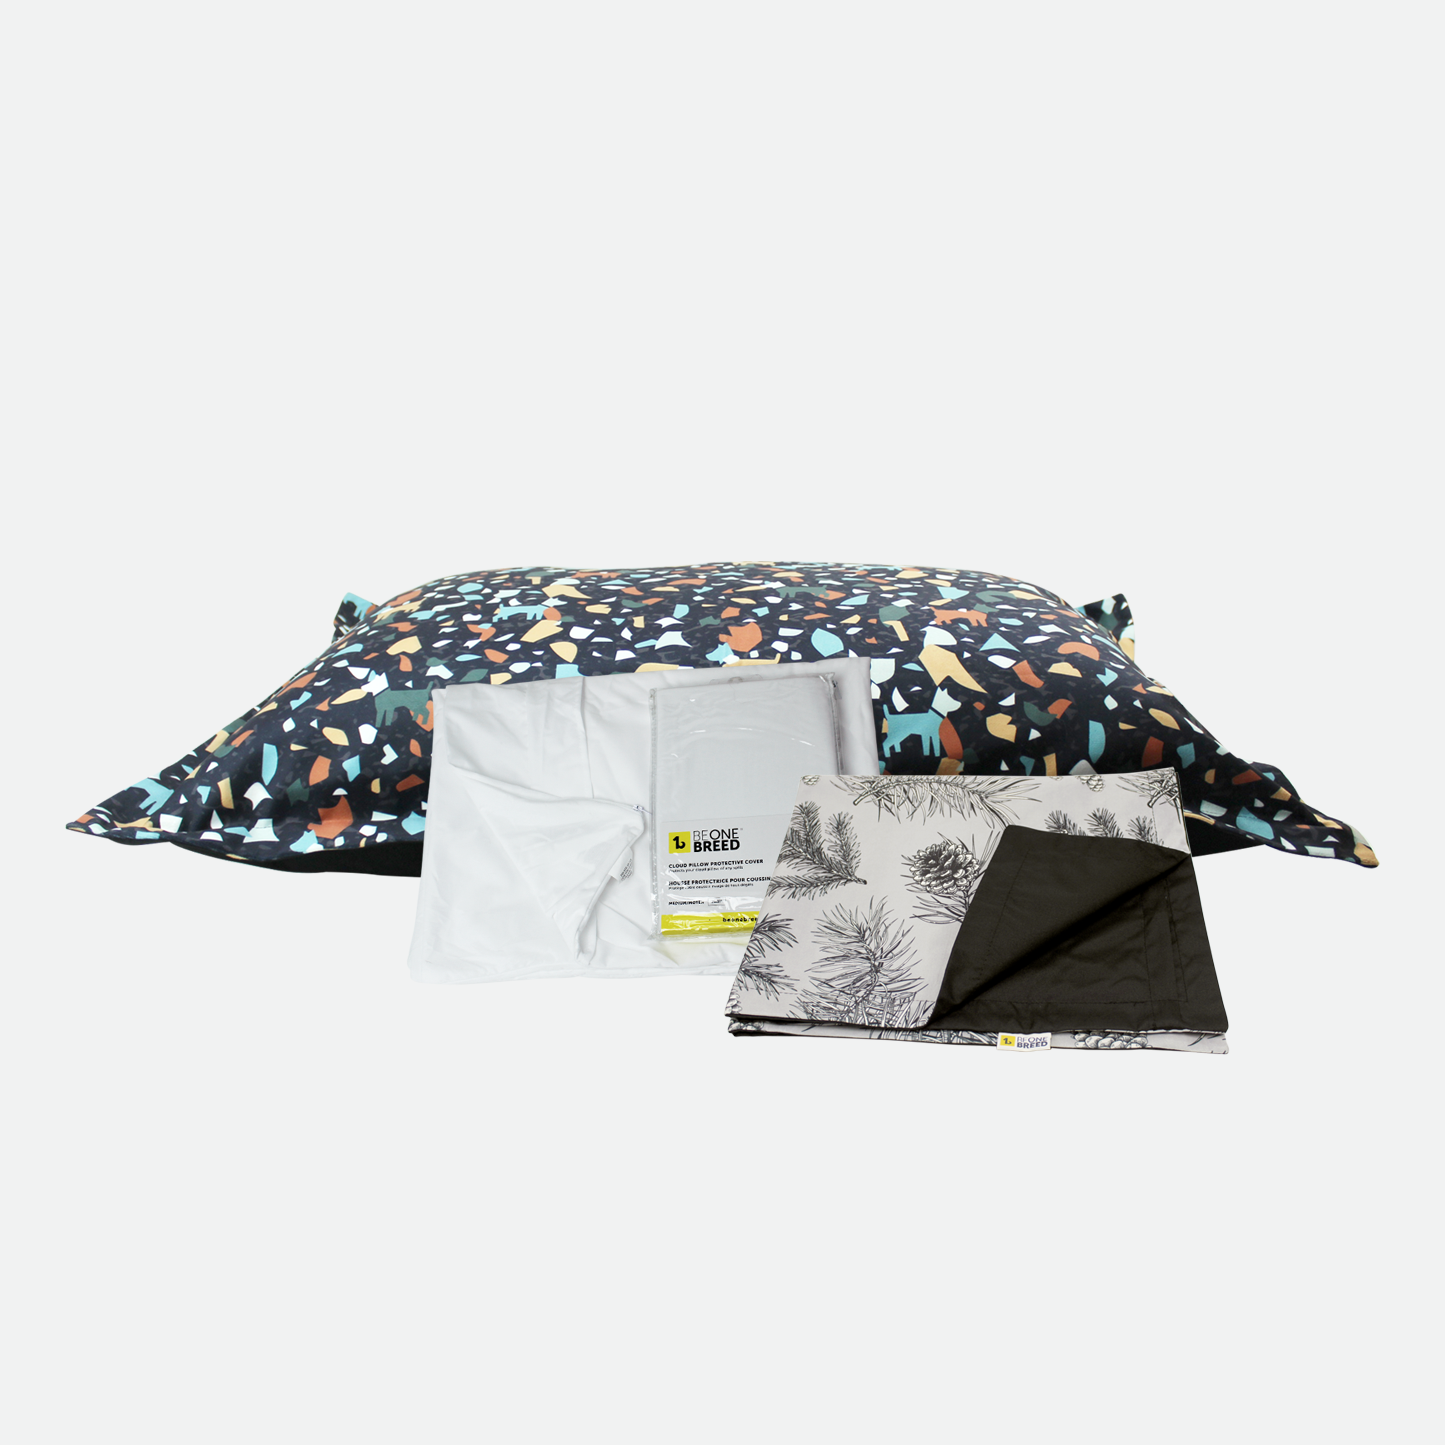 Ultimate savings bundle - Cloud pillow and spare covers